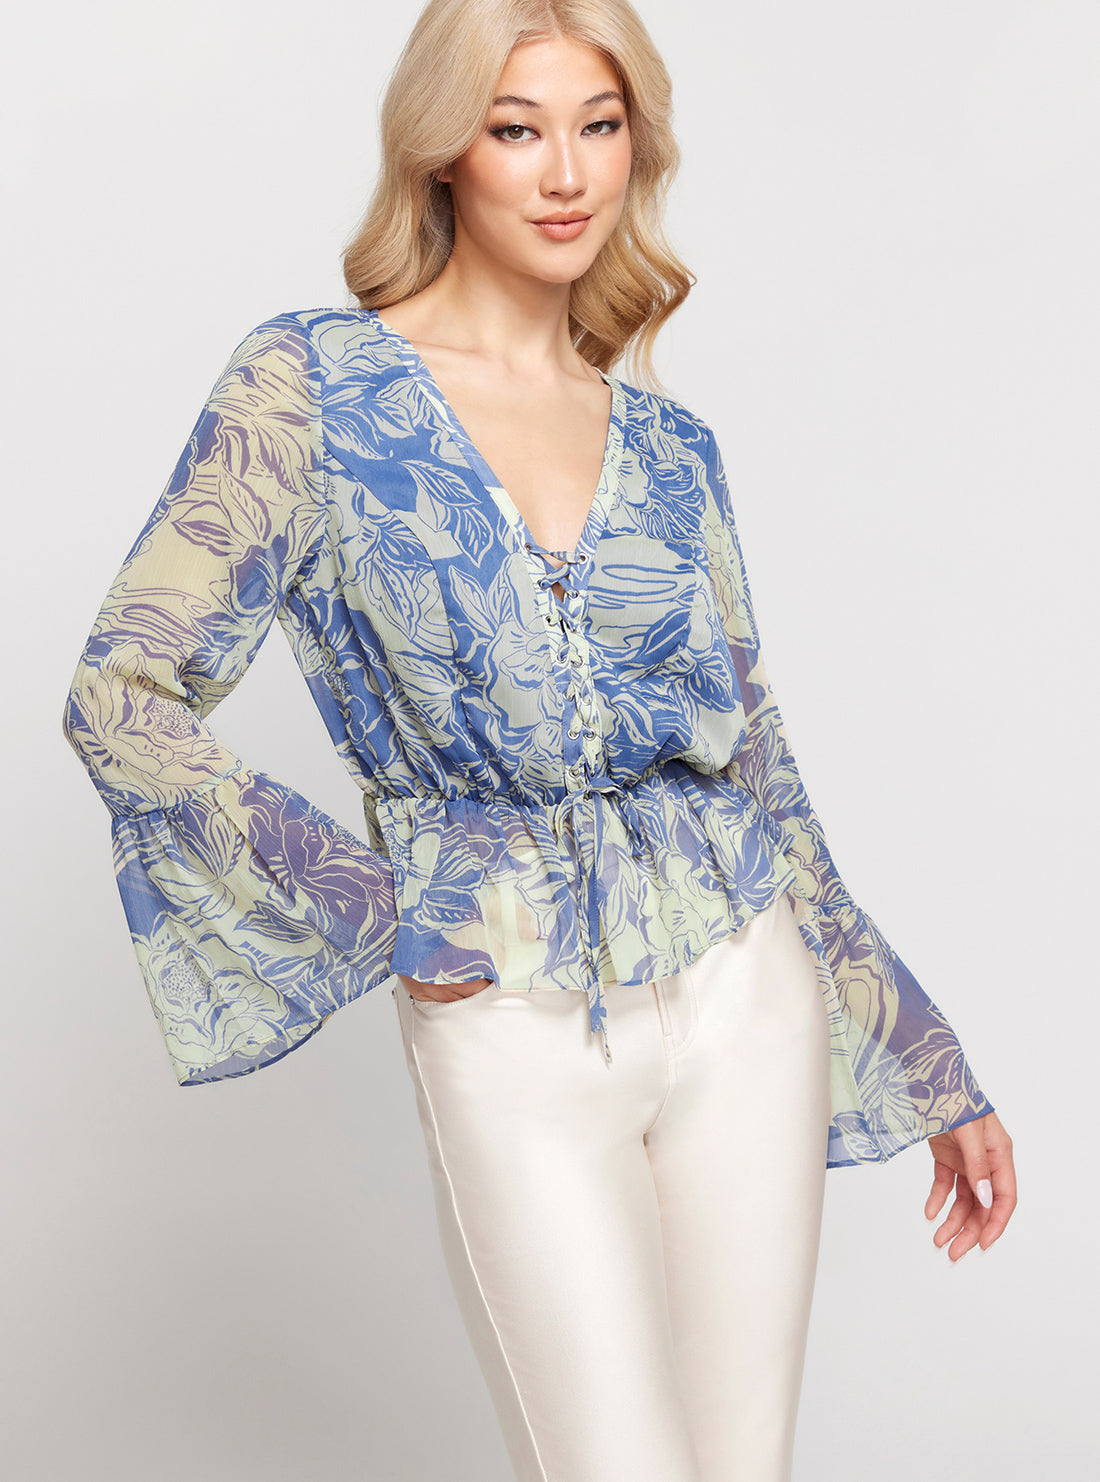 GUESS Blue Floral Print Long Sleeve Demi Top detail view